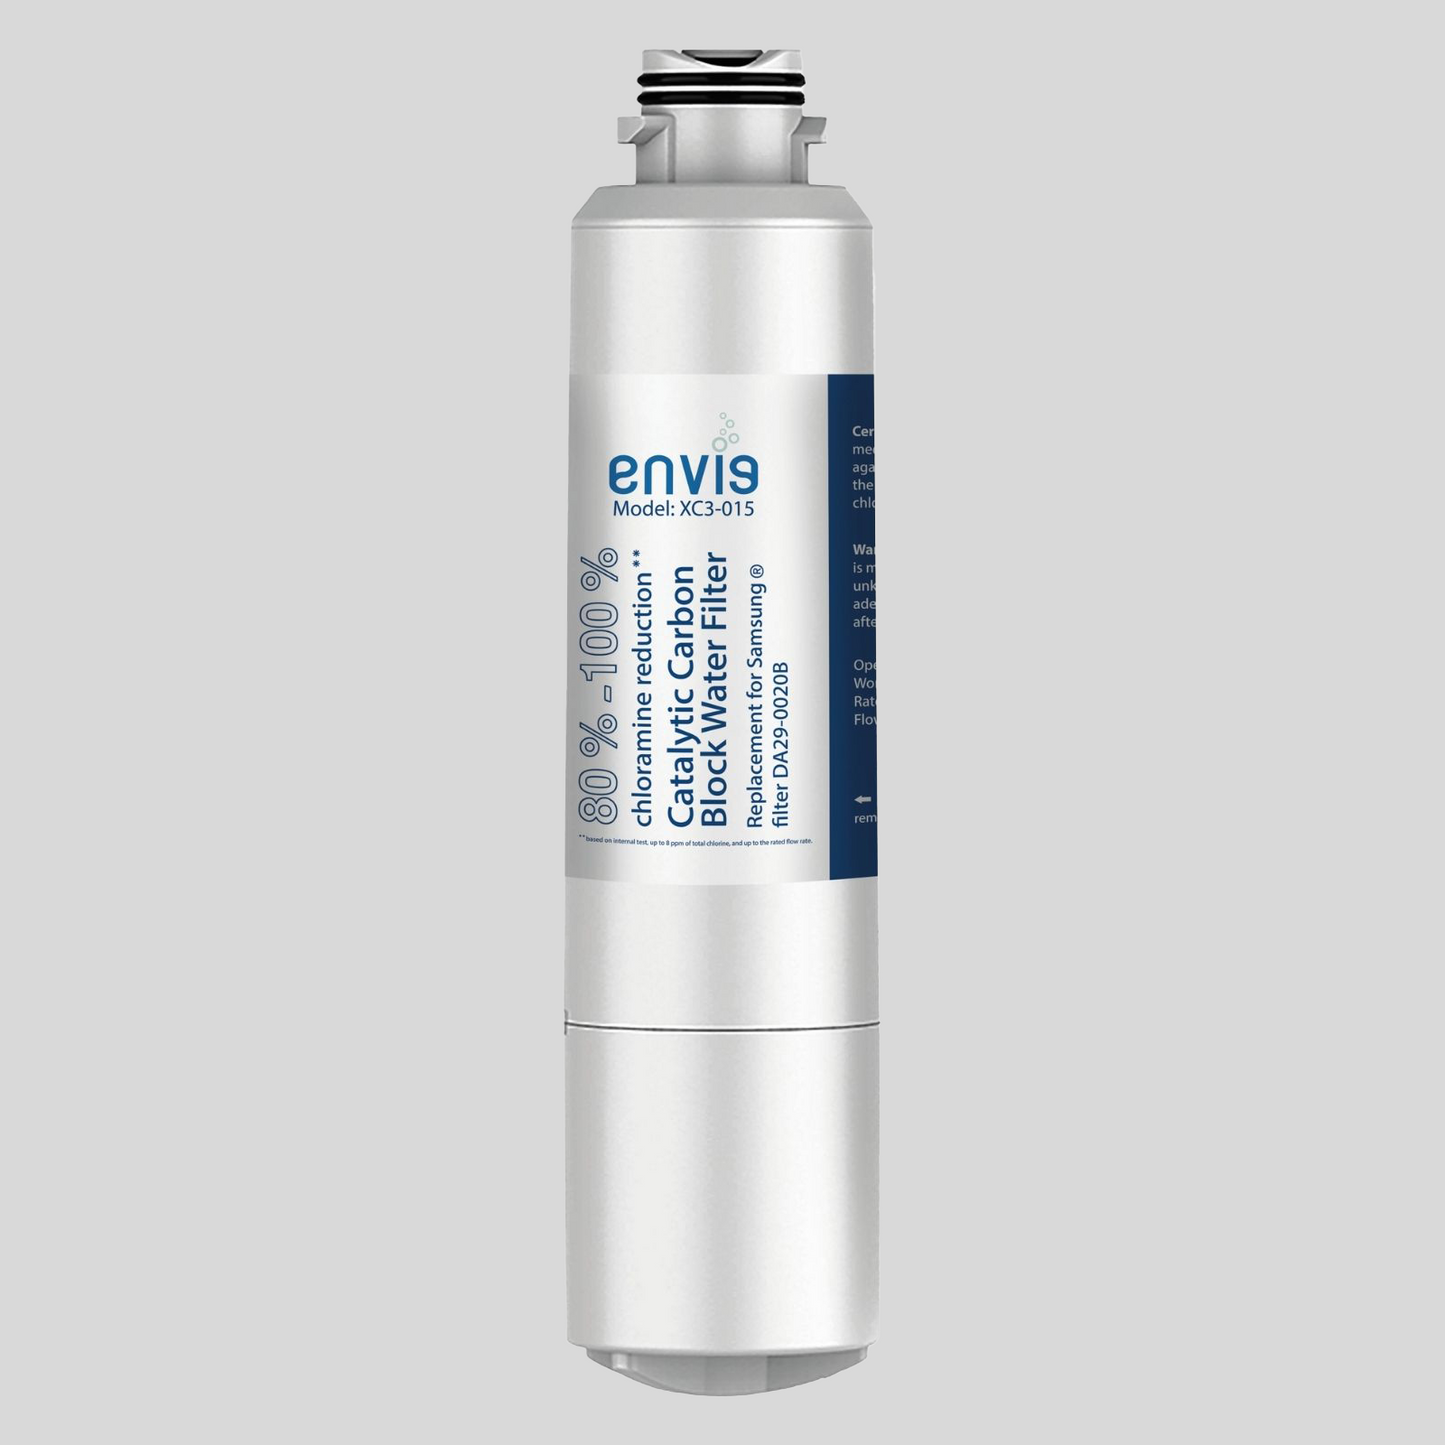 Envig Catalytic Carbon Refrigerator Filter, 80% - 100% Chloramine Removal, Premium Replacement Filter for Samsung DA29-00020A/B